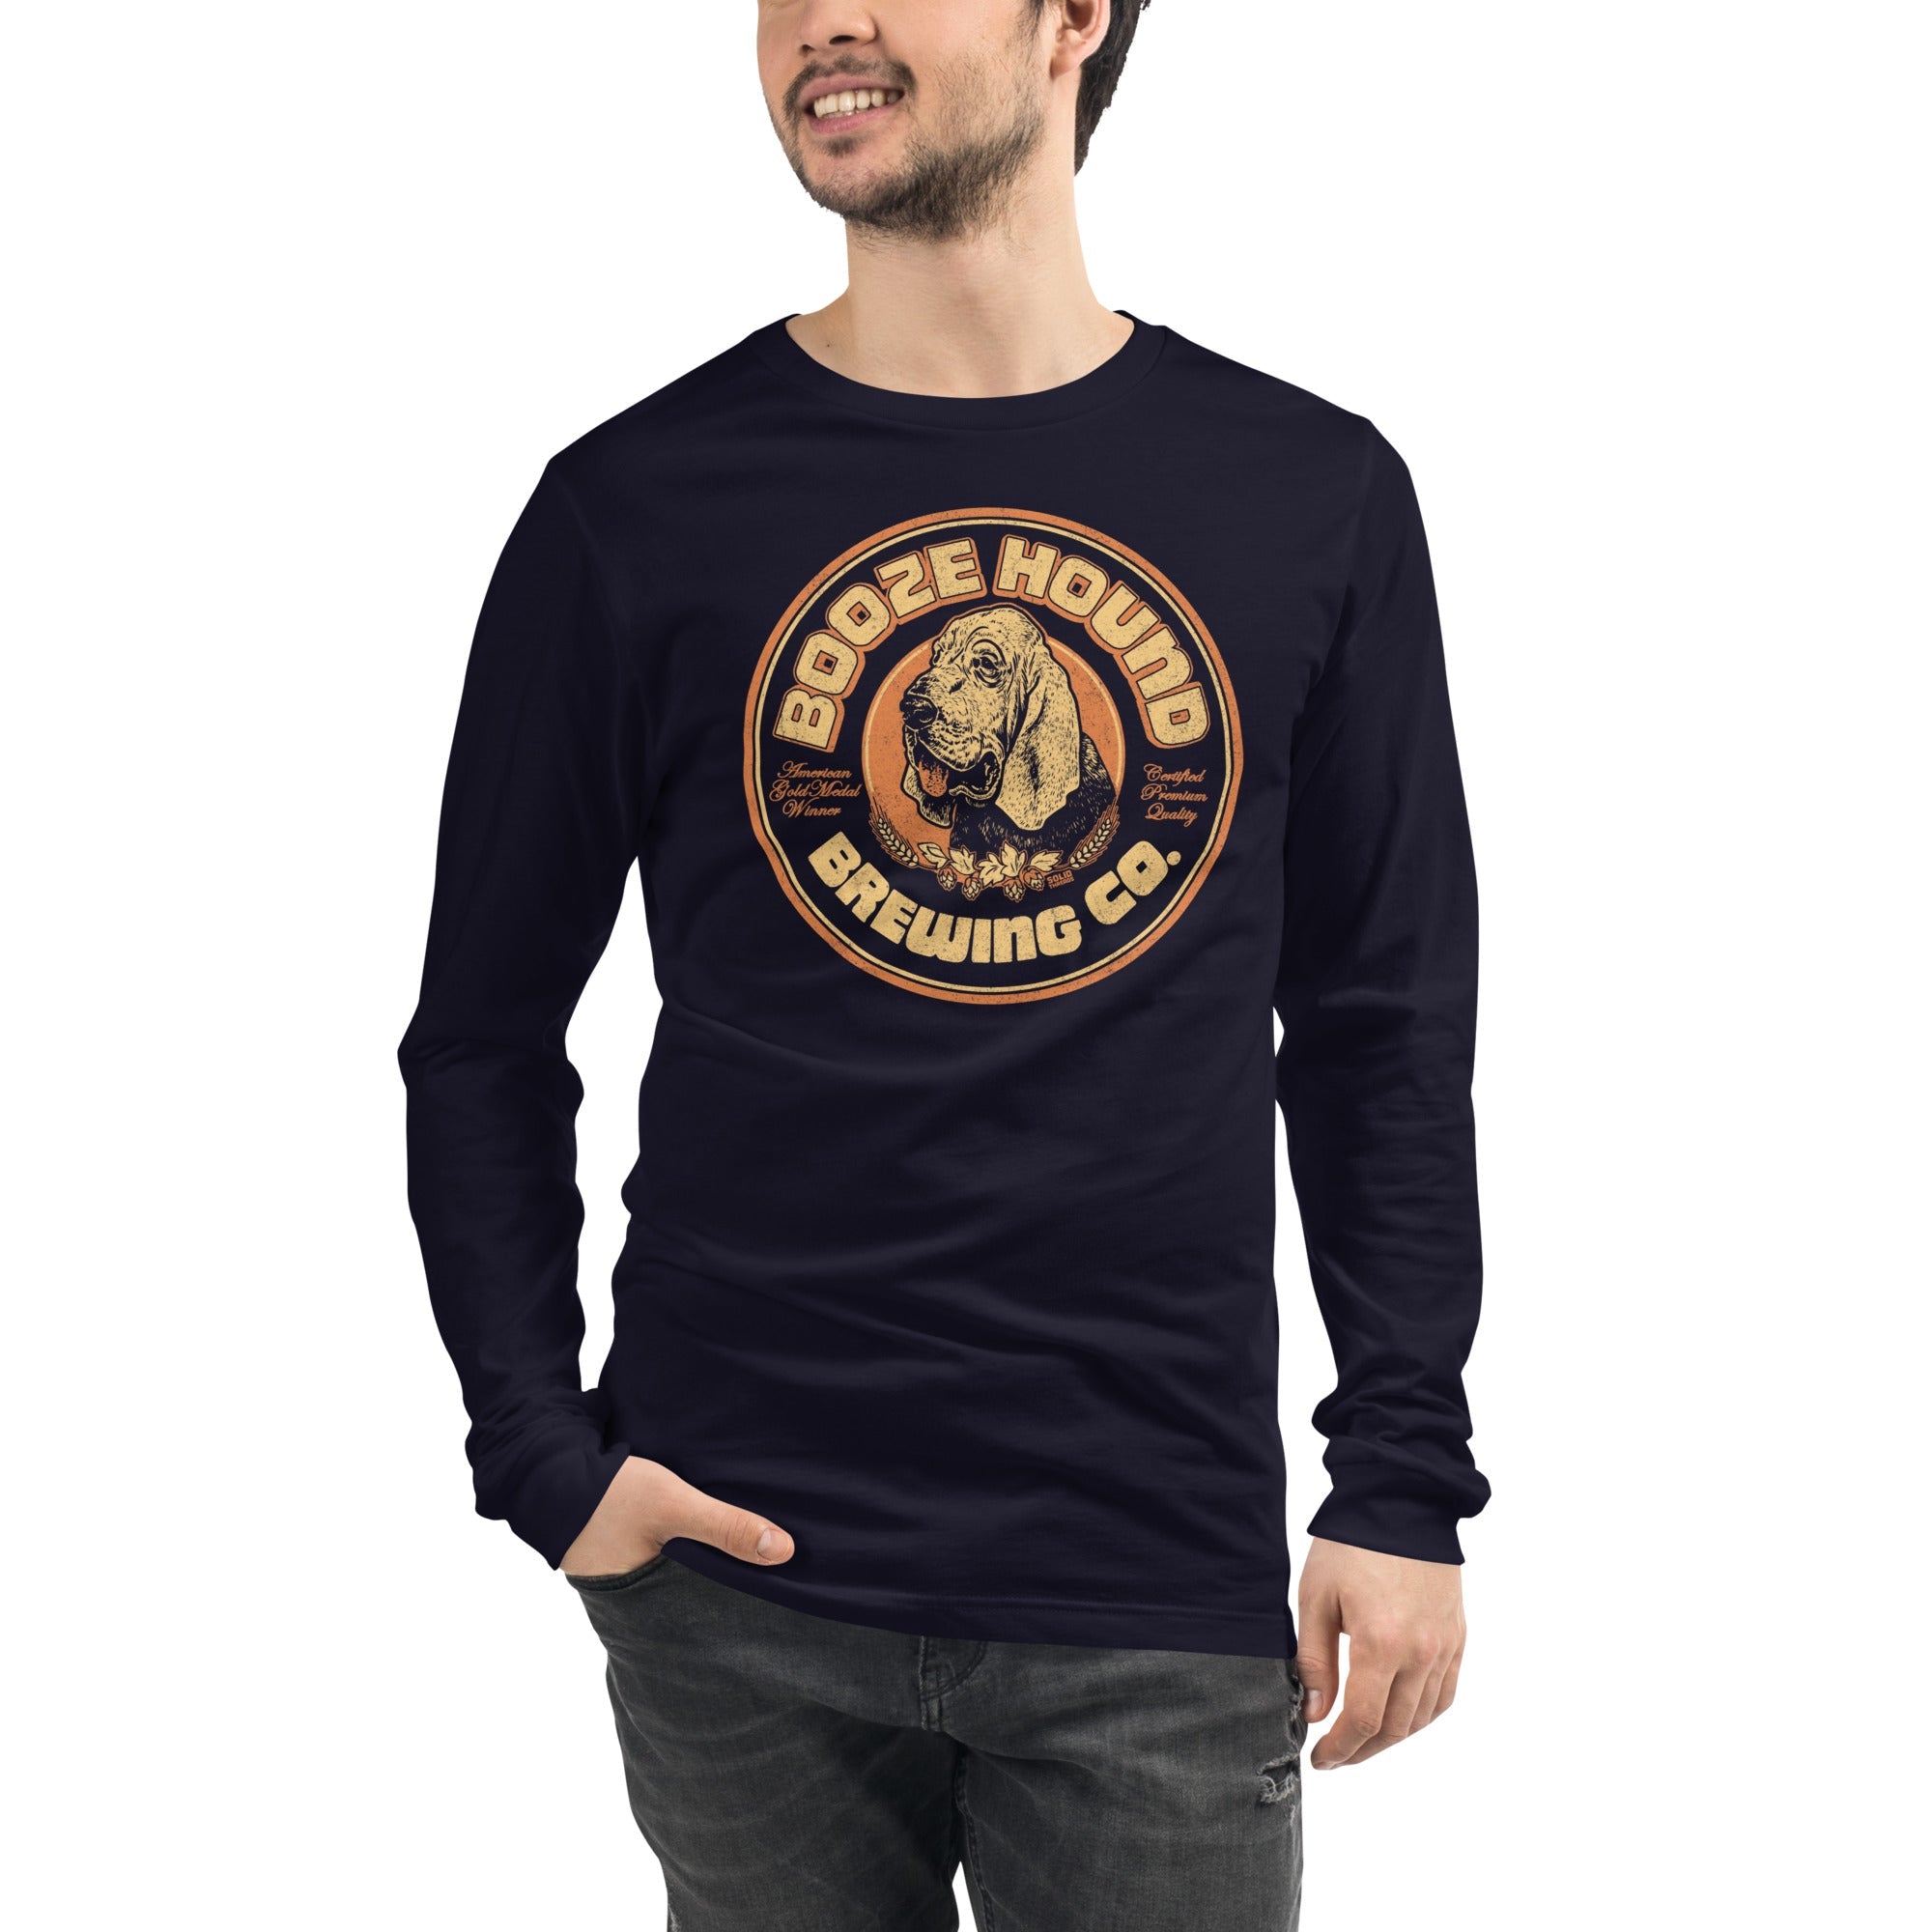 Boozehound Brewing Co. Vintage Graphic Long Sleeve Tee | Retro Drinking T-Shirt Model Closeup - Solid Threads